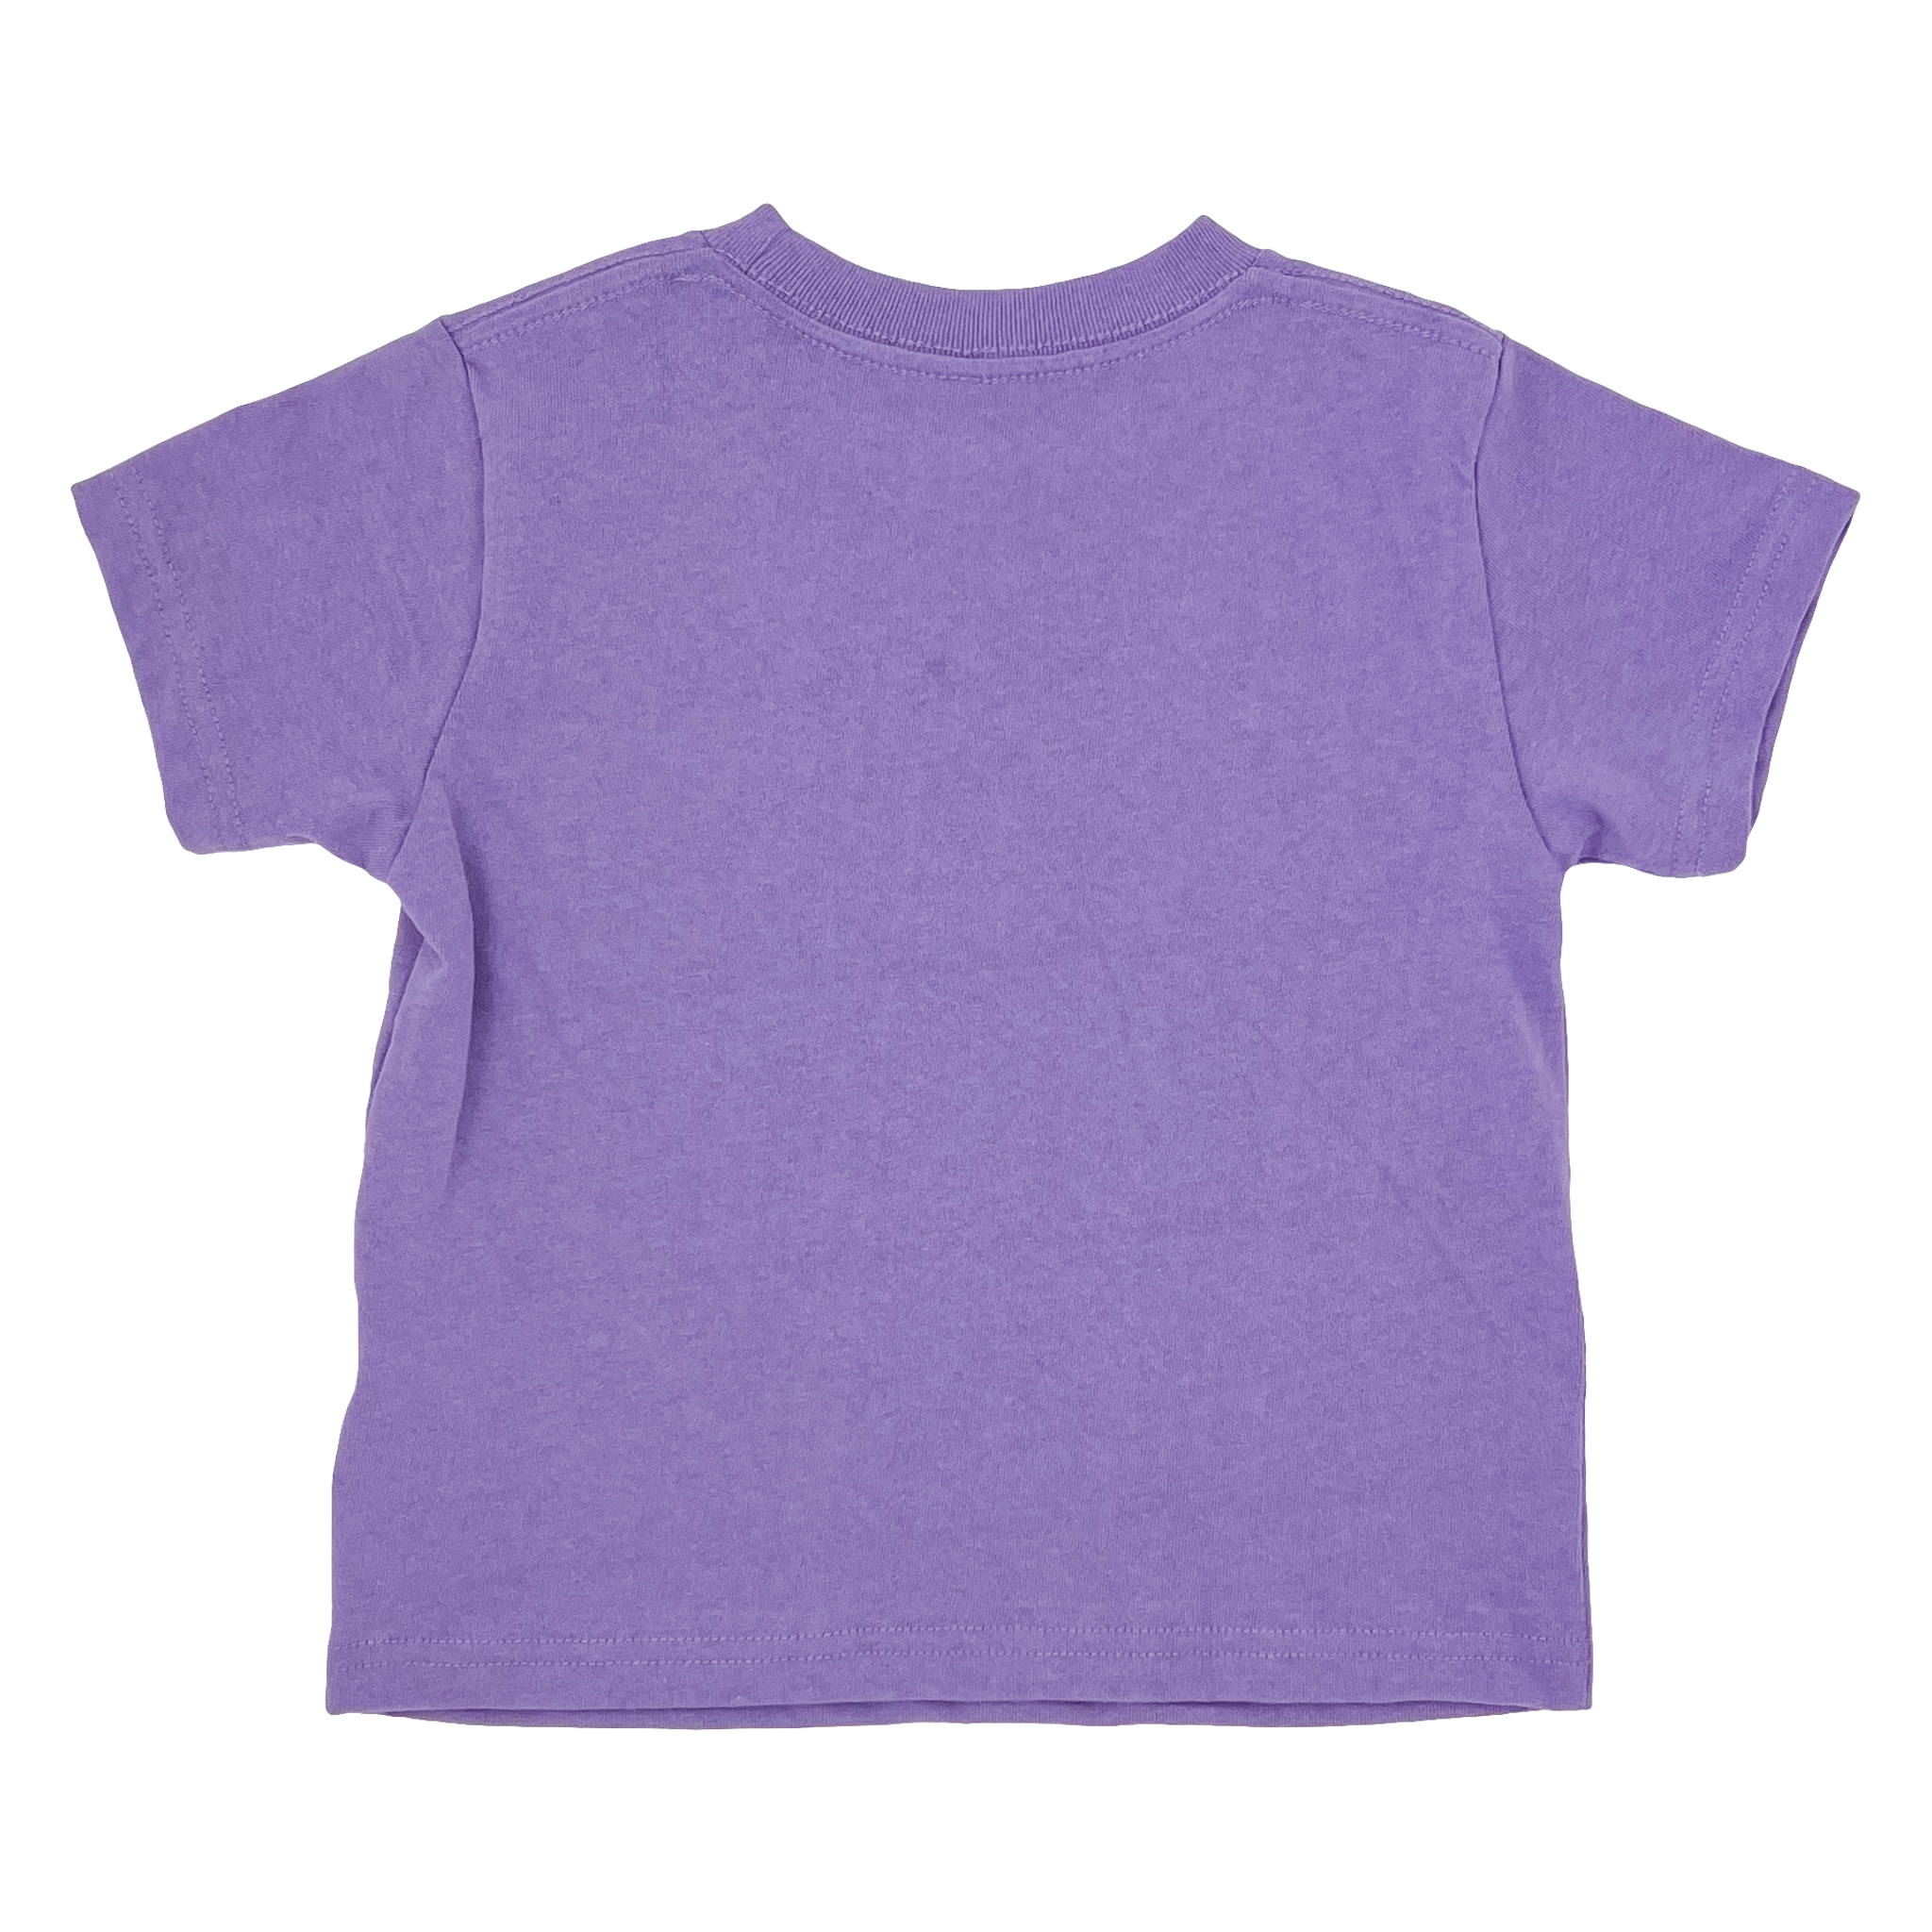 Back of a lavender toddler tee.